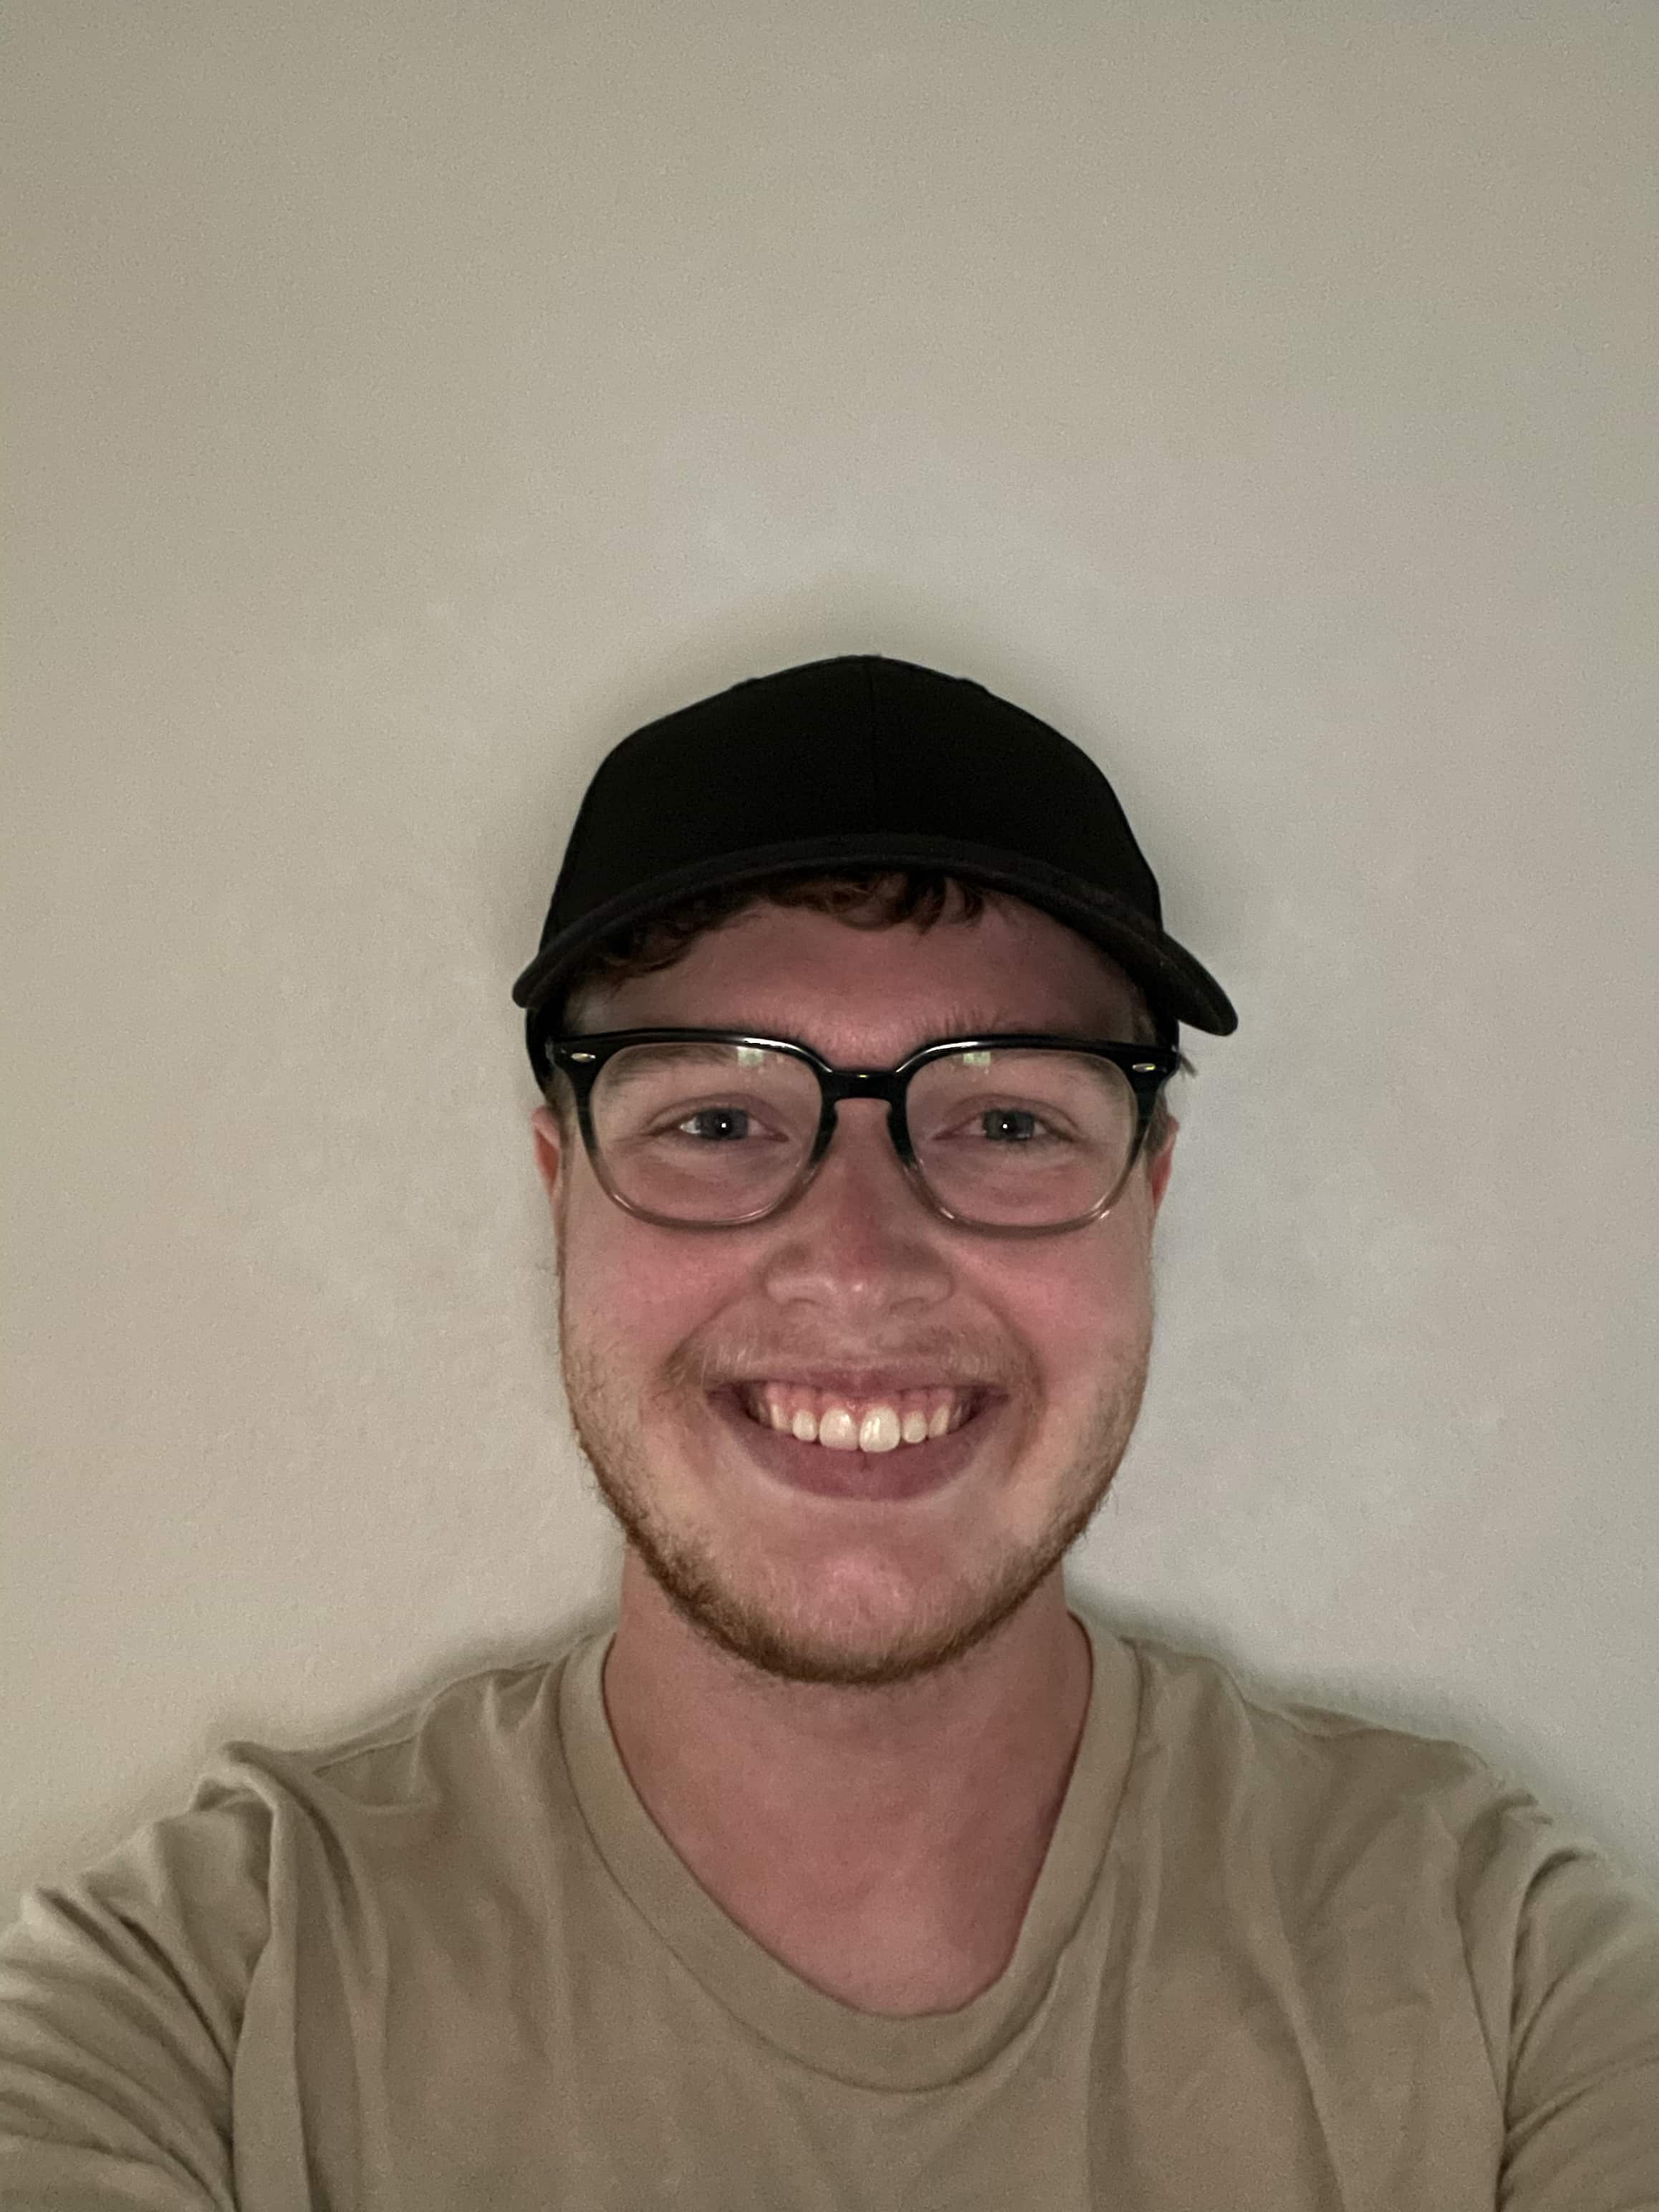 Carson Hodges, wearing a hat, glasses, and a green top